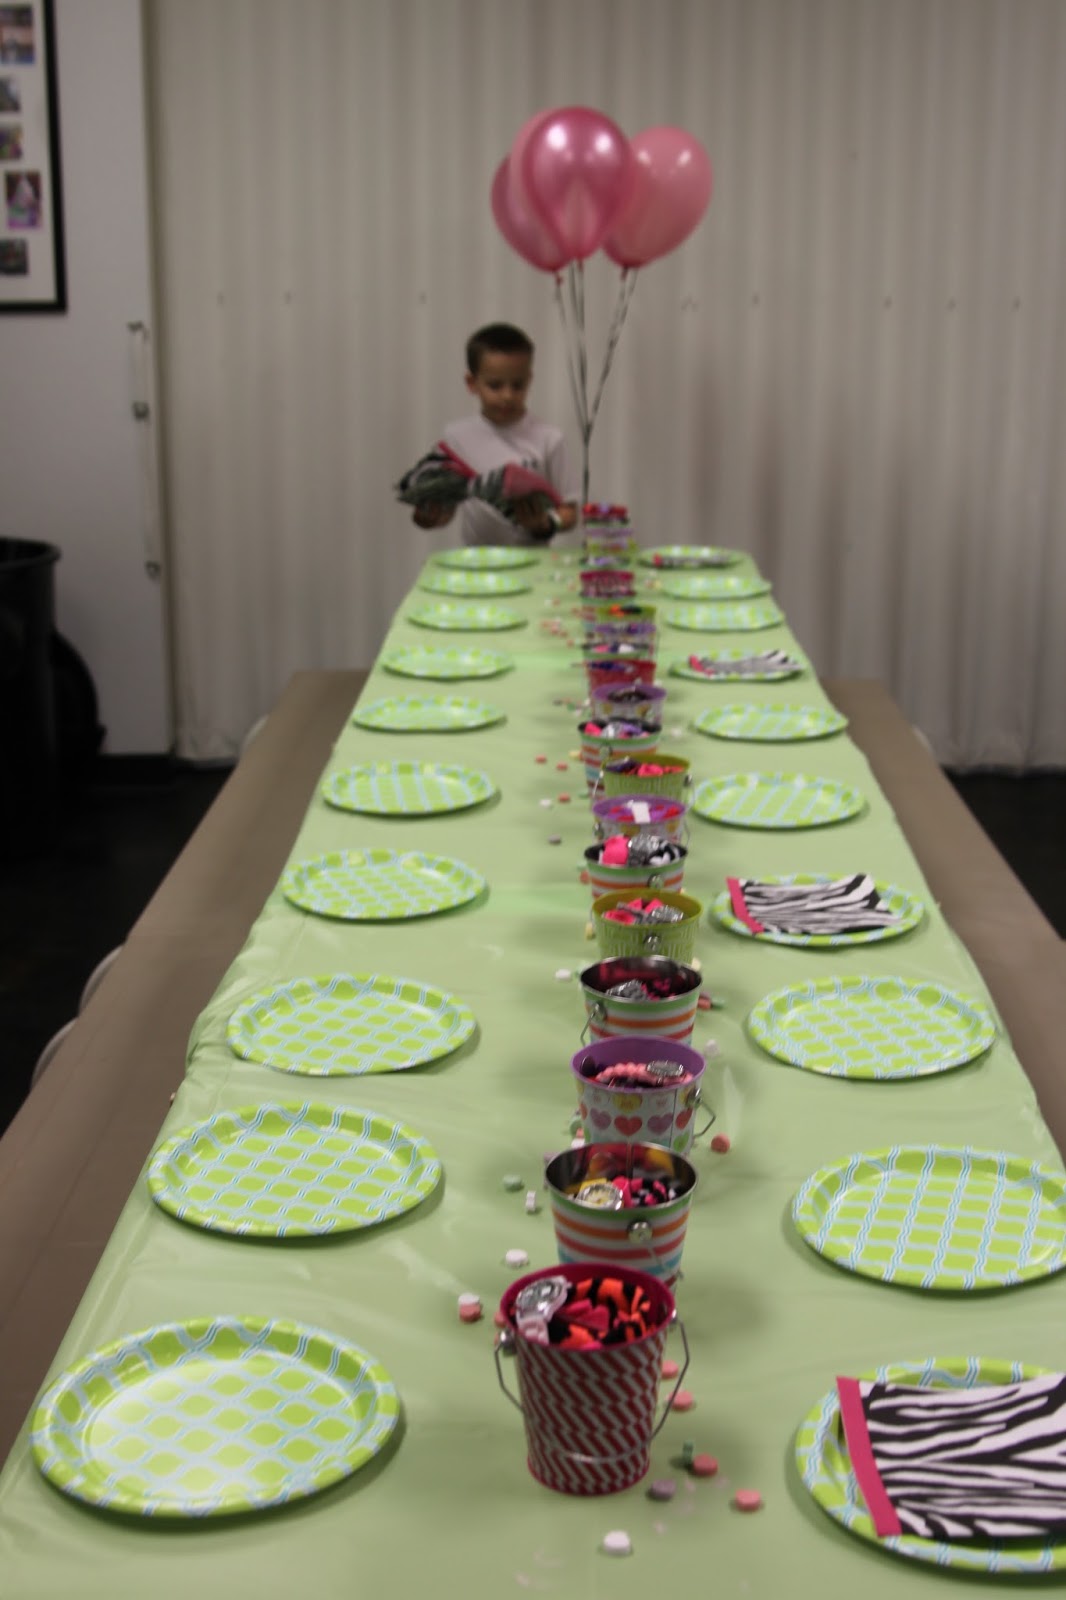 What Are Some Creative Ideas For A Big 13th Birthday Party?